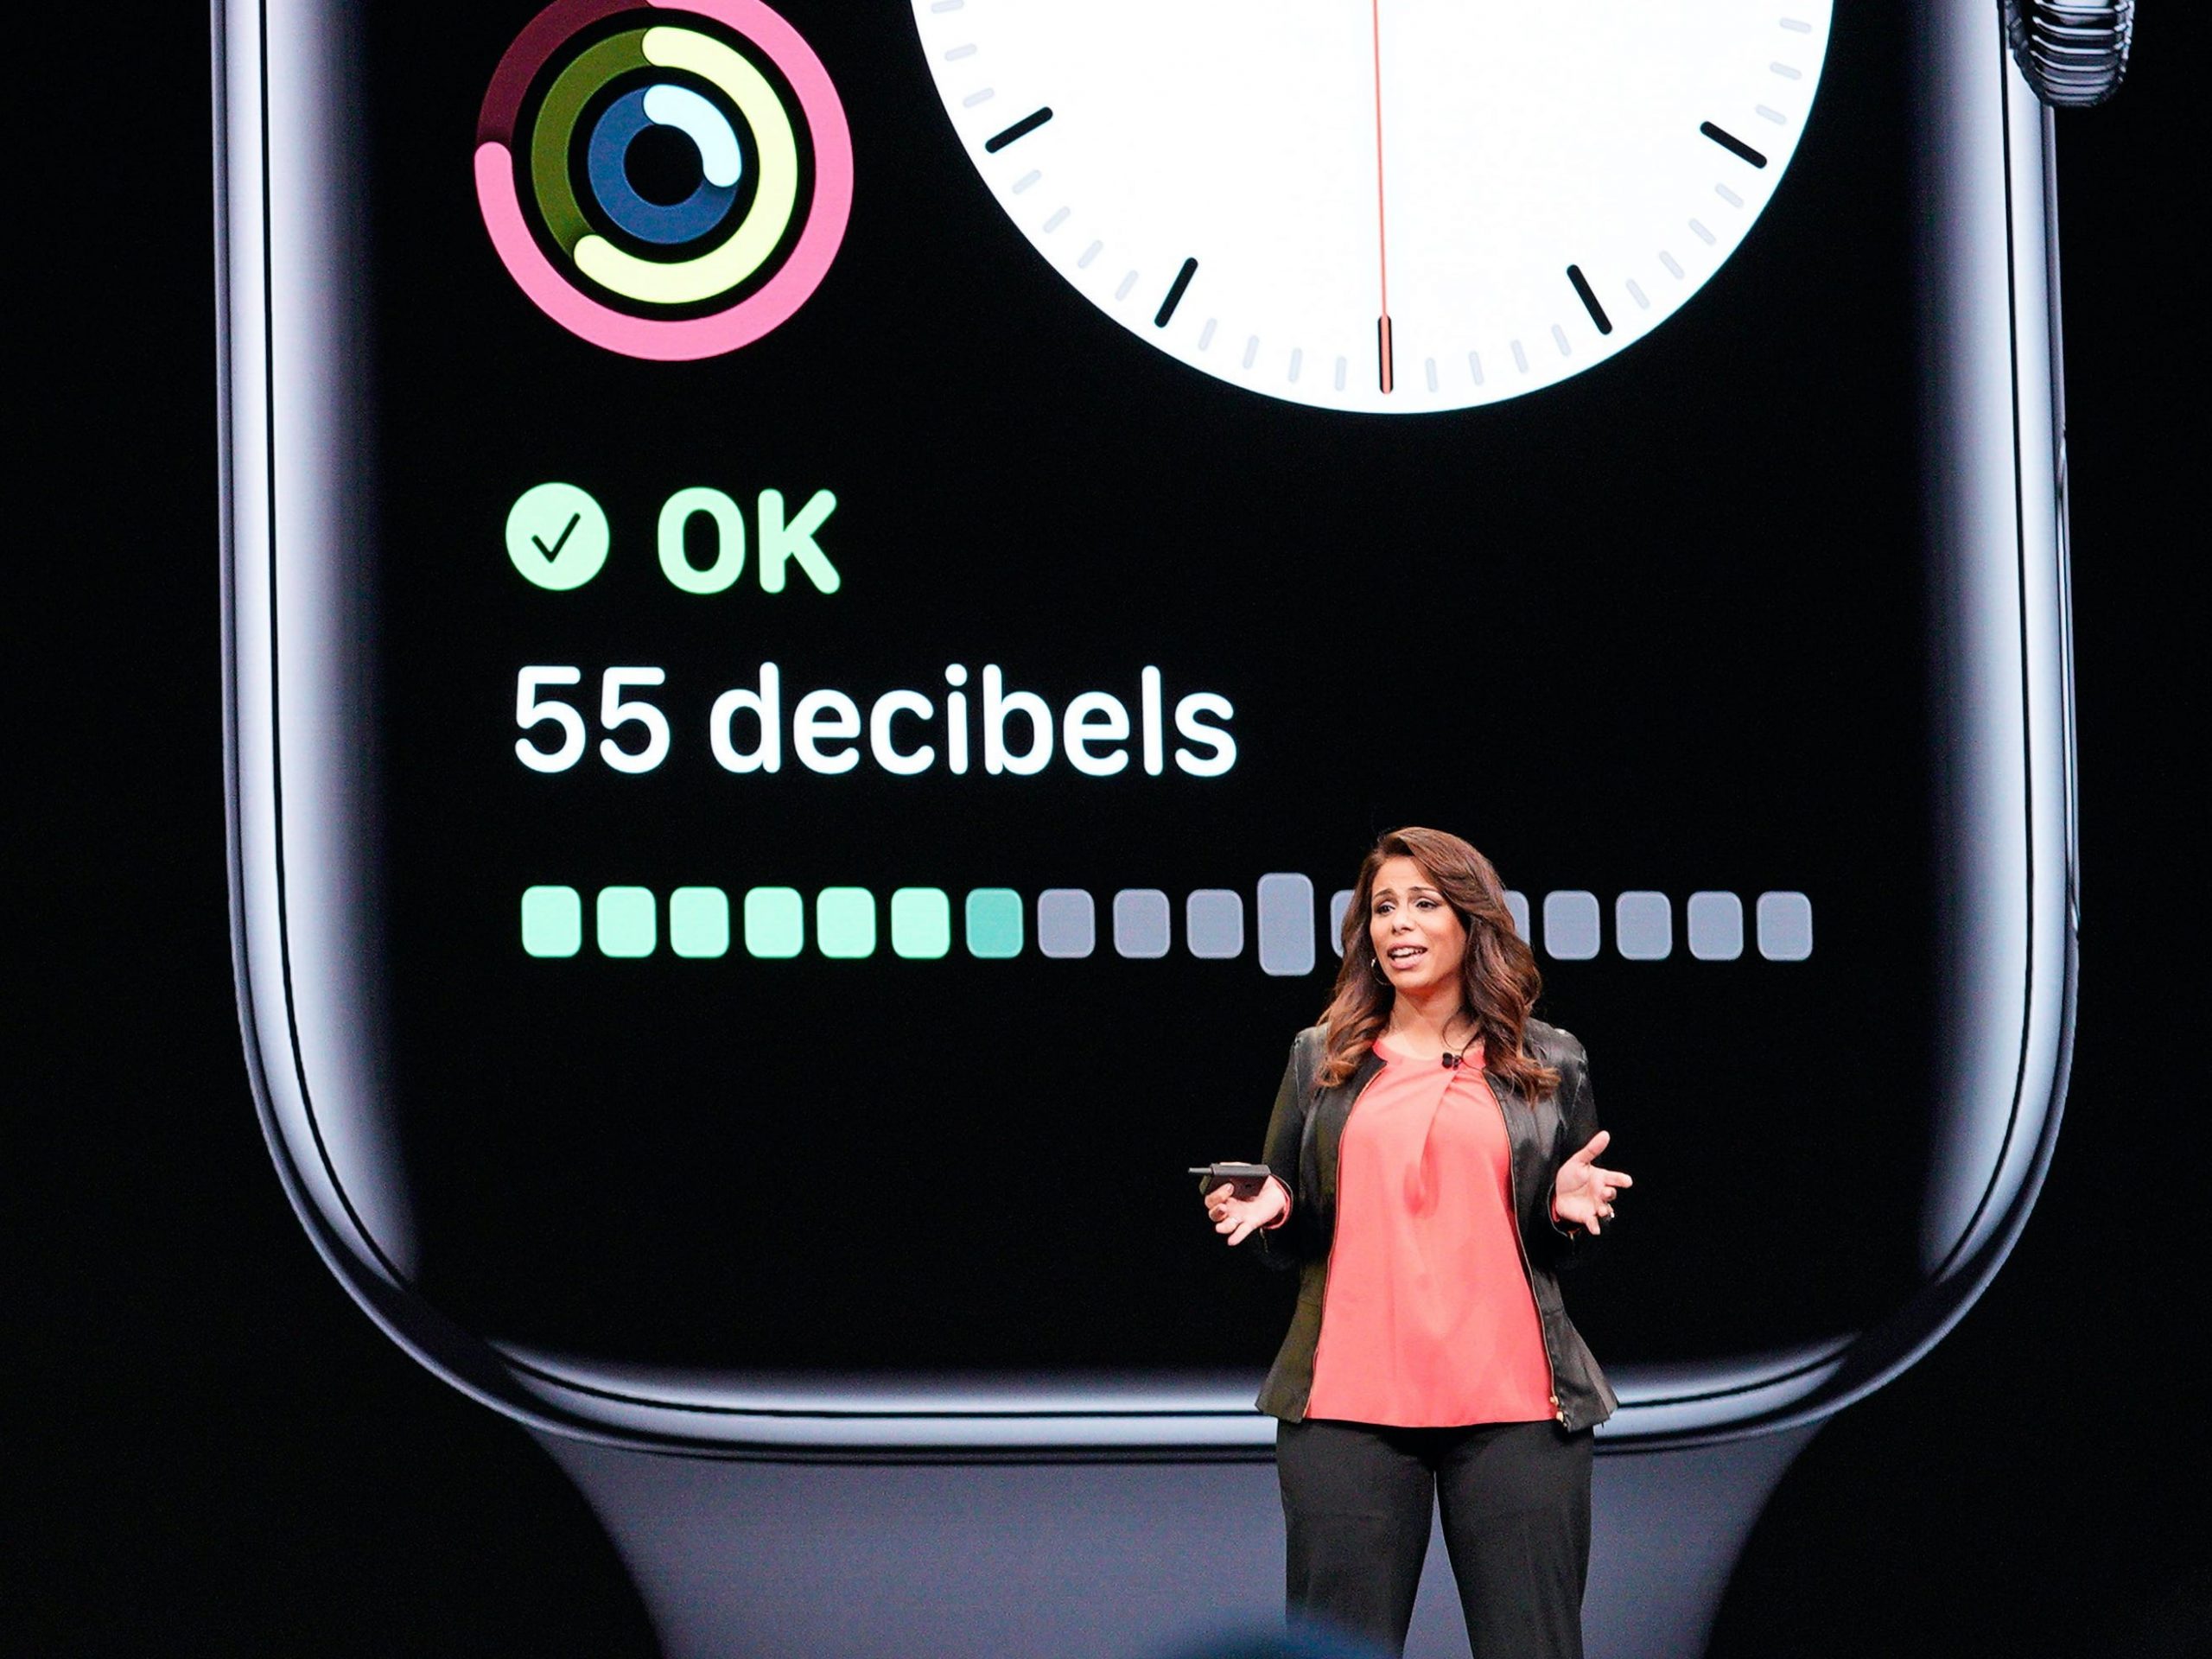 Dr. Sumbul Desai, M.D., a VP of health at Apple, speaks during Apple's developers conference in 2019.